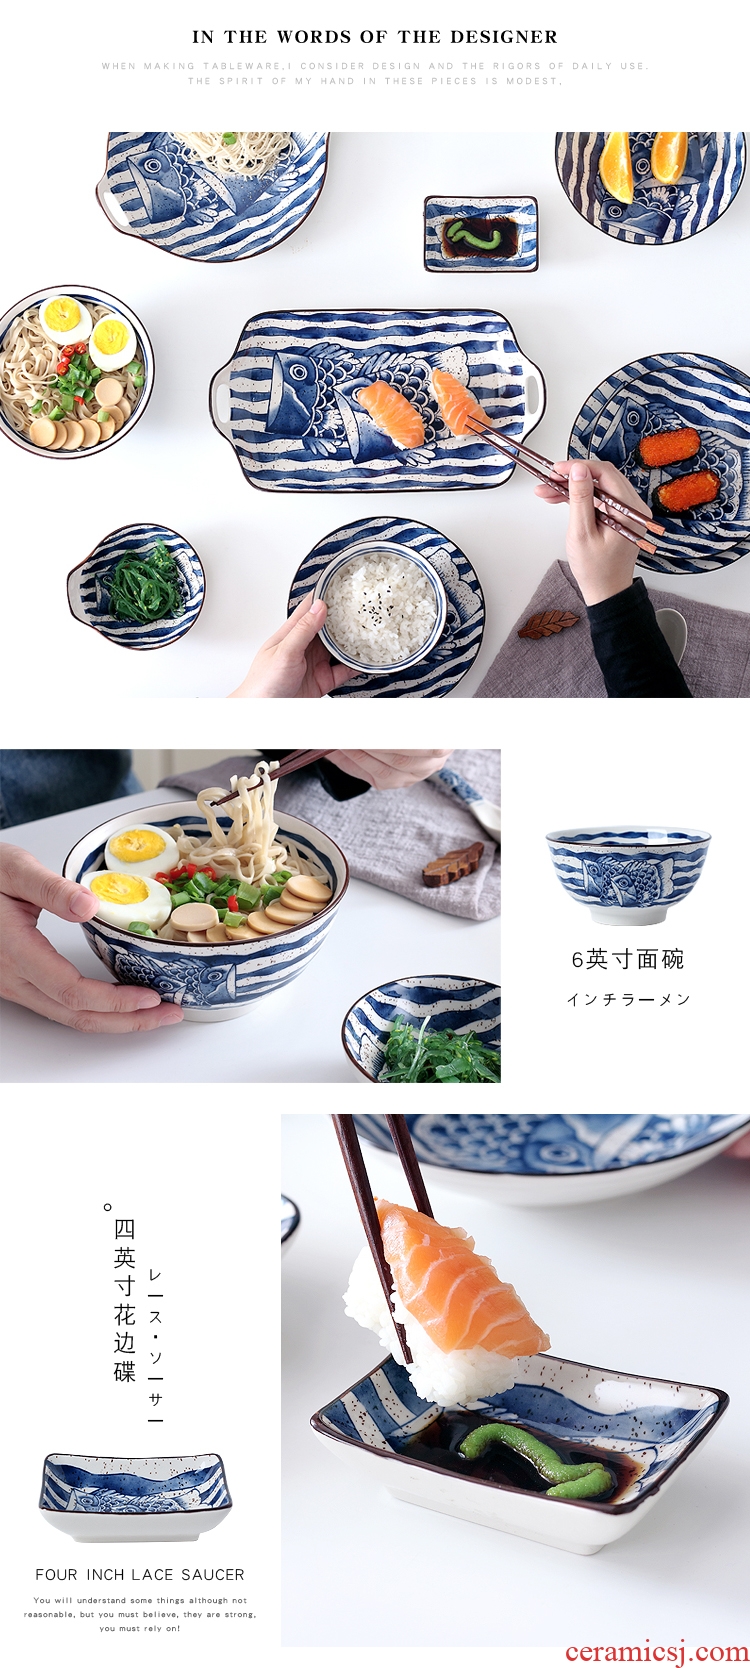 Ceramic bowl household under the glaze color bowl plate combination vintage Japanese noodles soup bowl of jingdezhen ceramic tableware to eat bread and butter